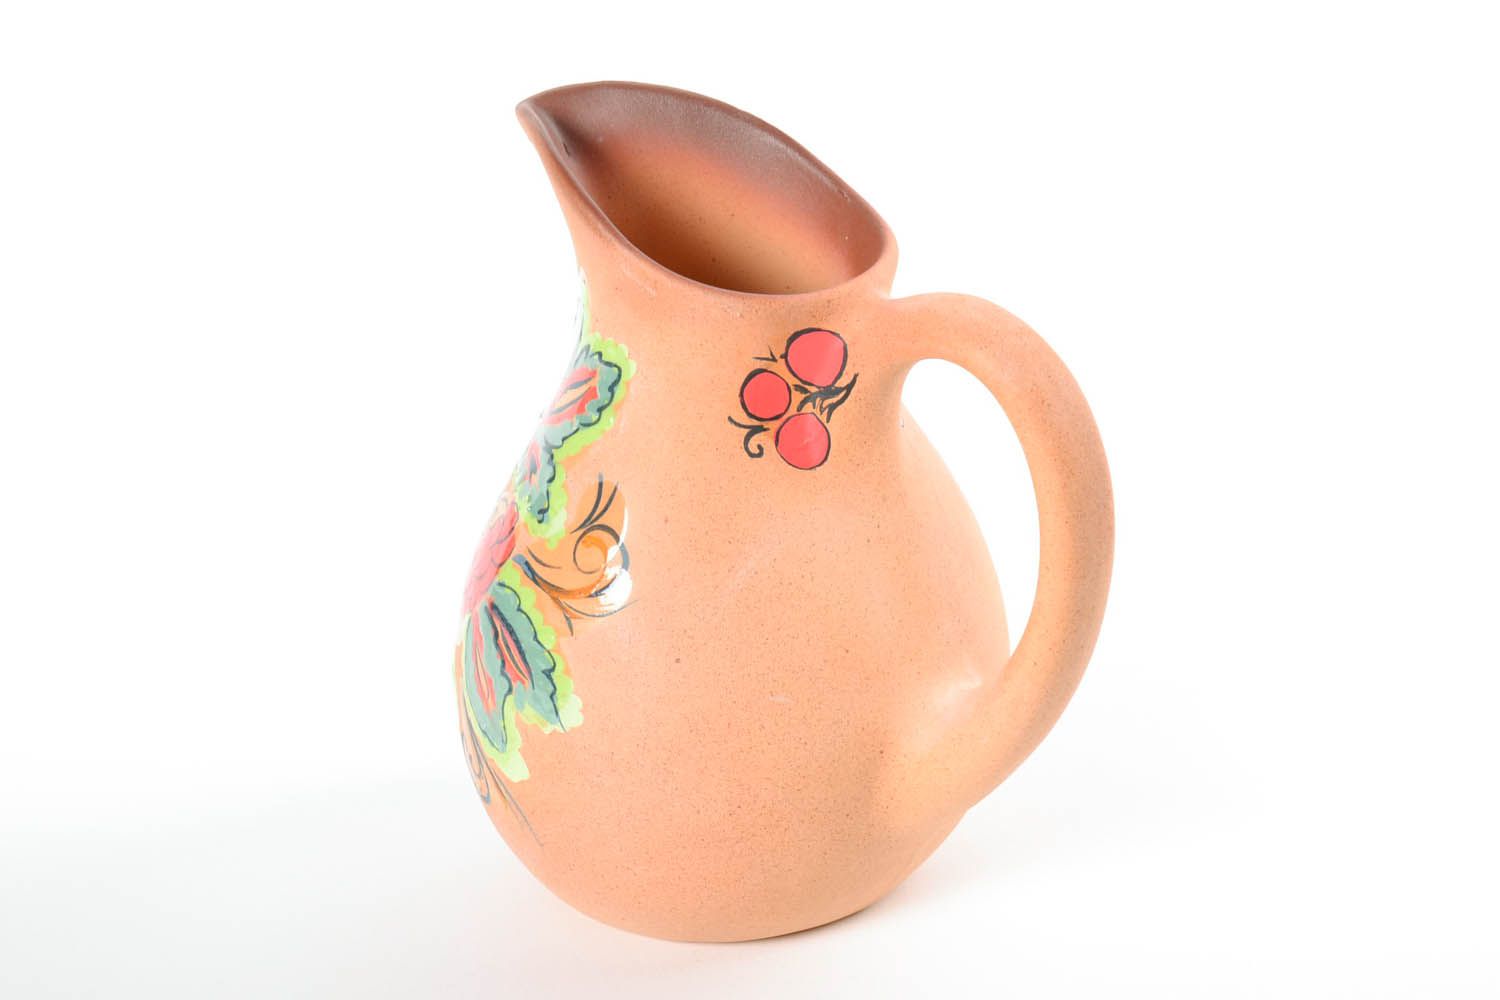 60 oz handmade lead-free clay pitcher with handle and hand-painted floral ornament 2,2 lb photo 4